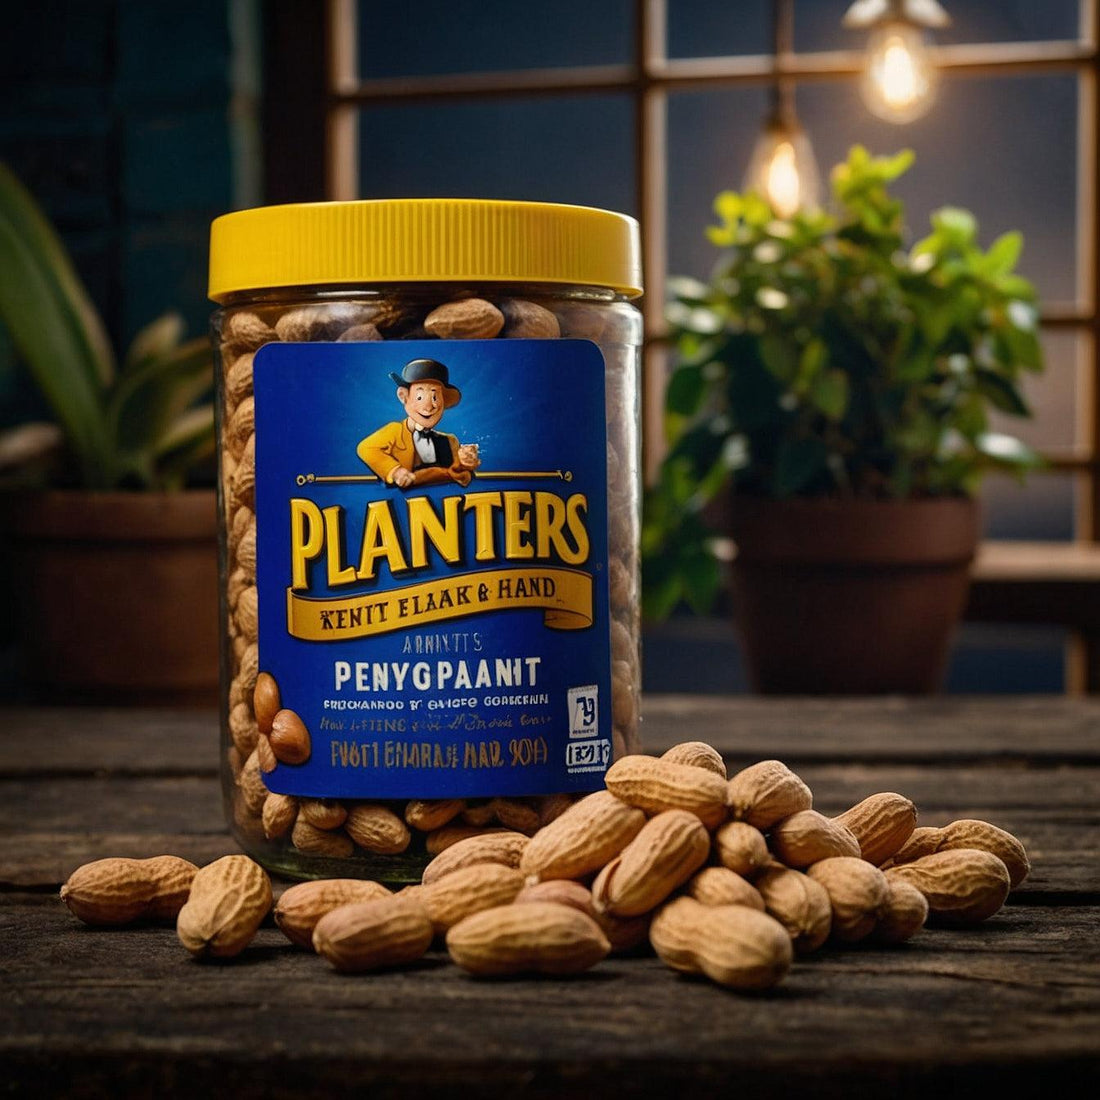 Do Planters Salted Peanuts Expire Or Go Bad? - BargainBoxed.com